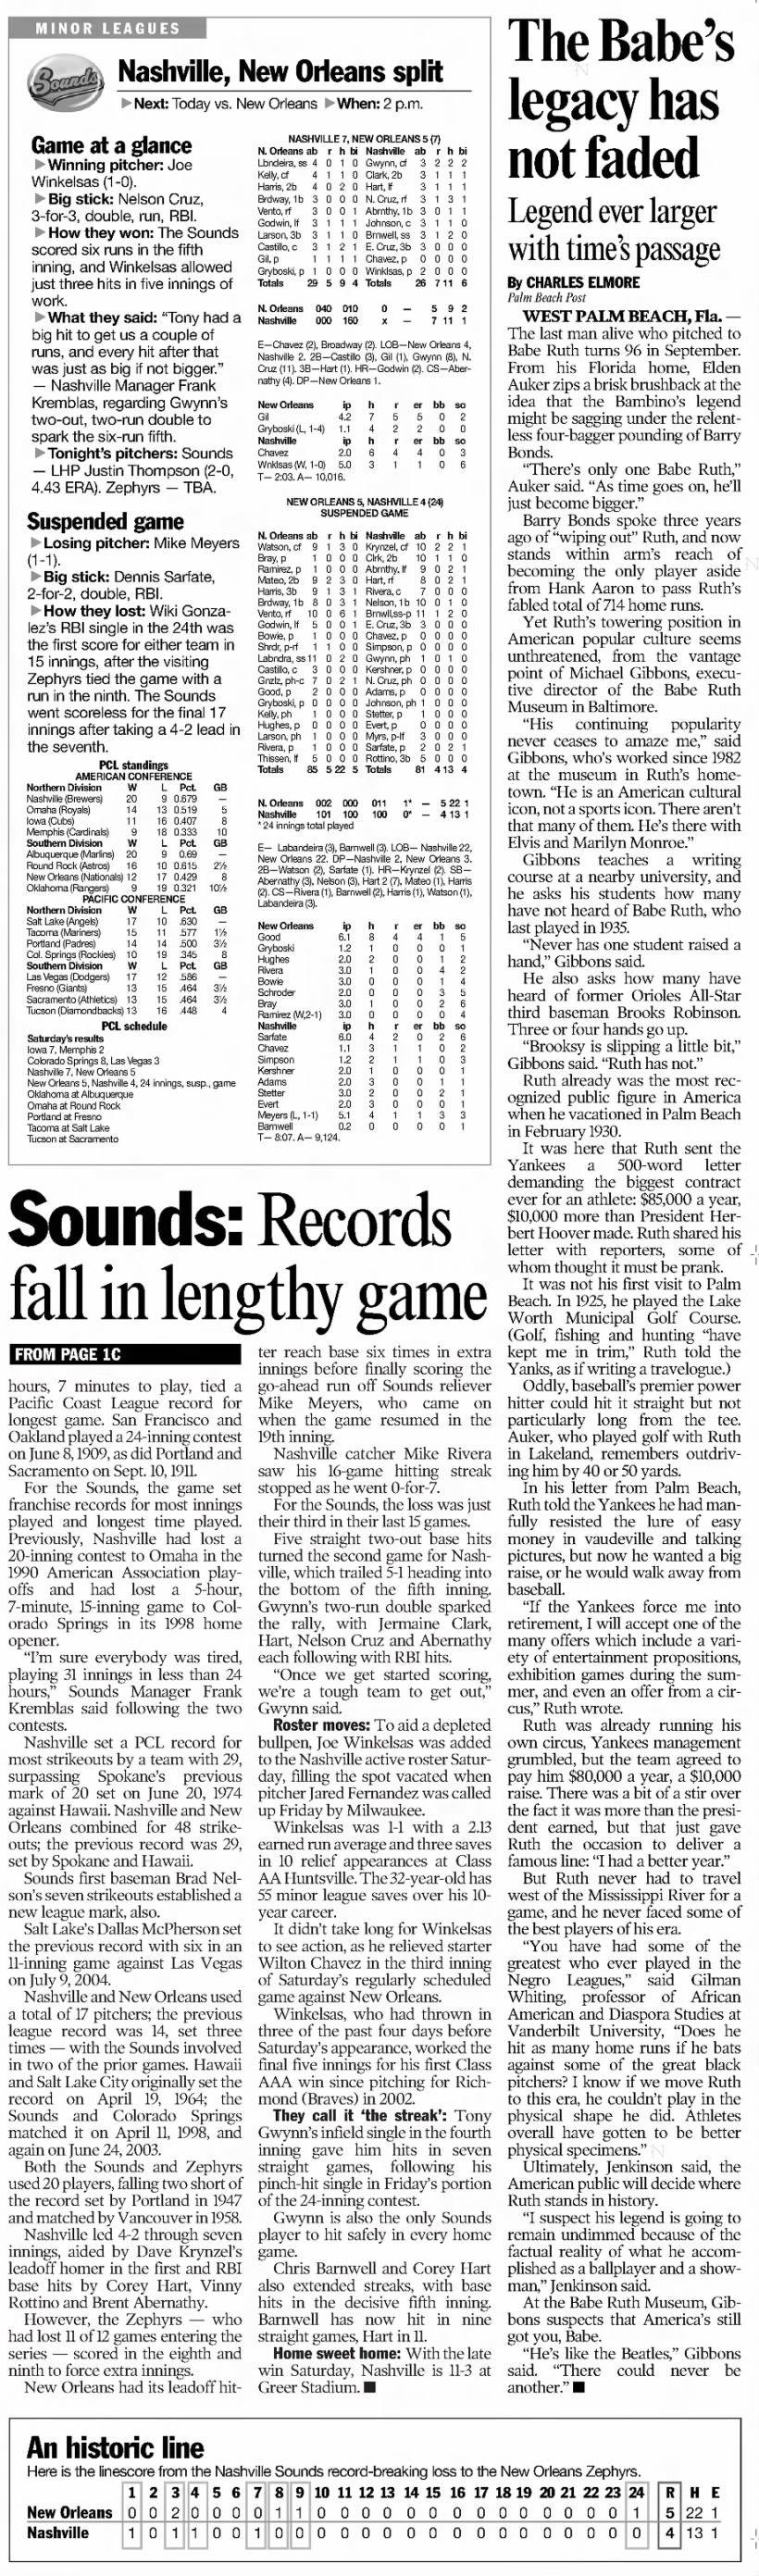 Sounds: Records Fall in Lengthy Game (ctd)